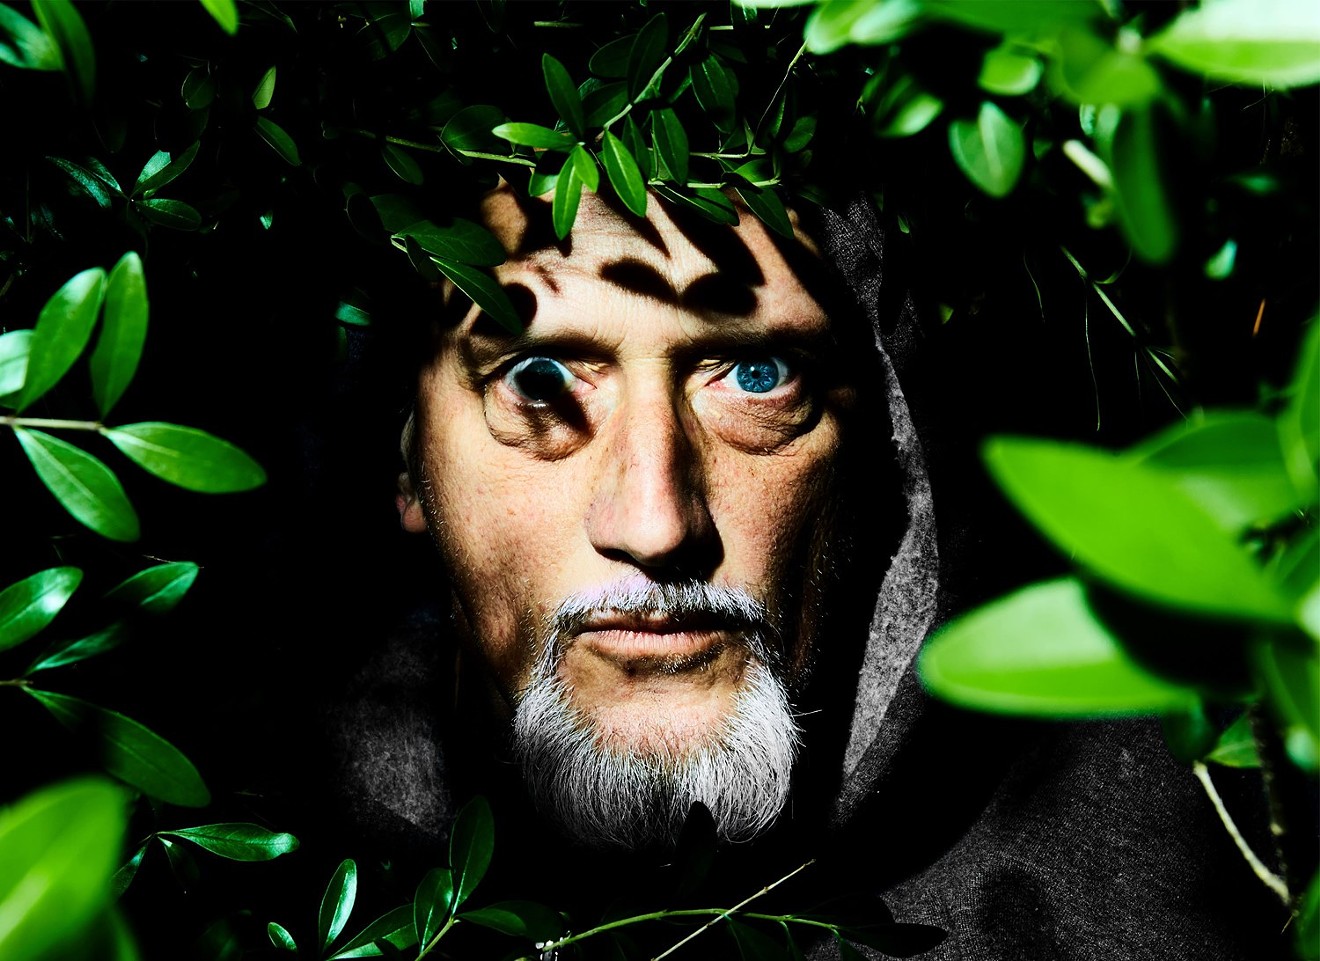 Musician Paul Slavens emerges from the forest on the cover for his single "X On My Heart."